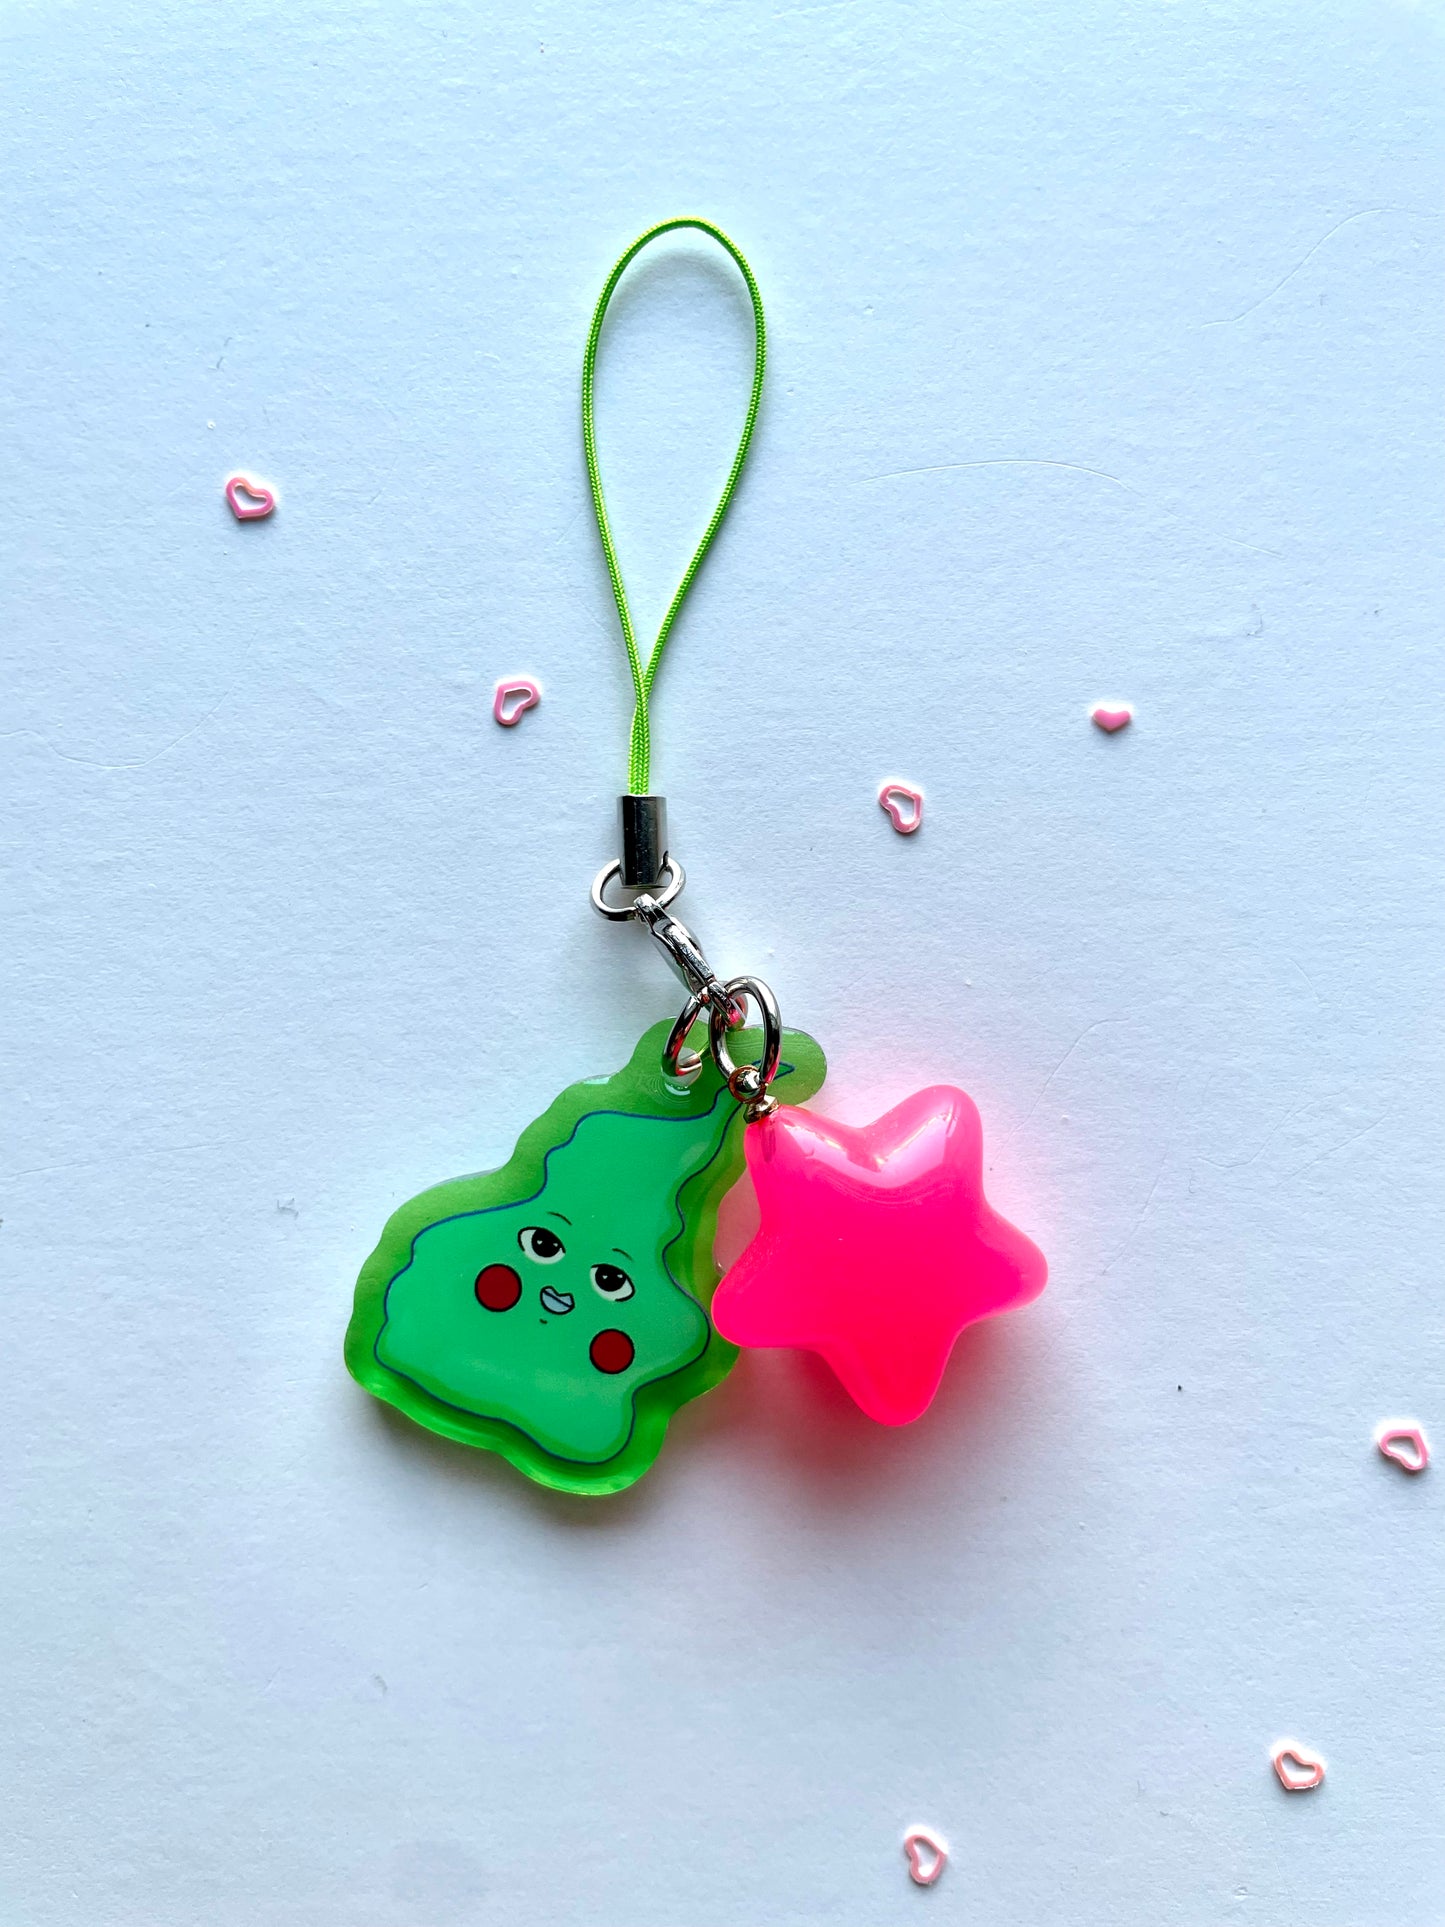 Discounted Keychains and Phone Charms!